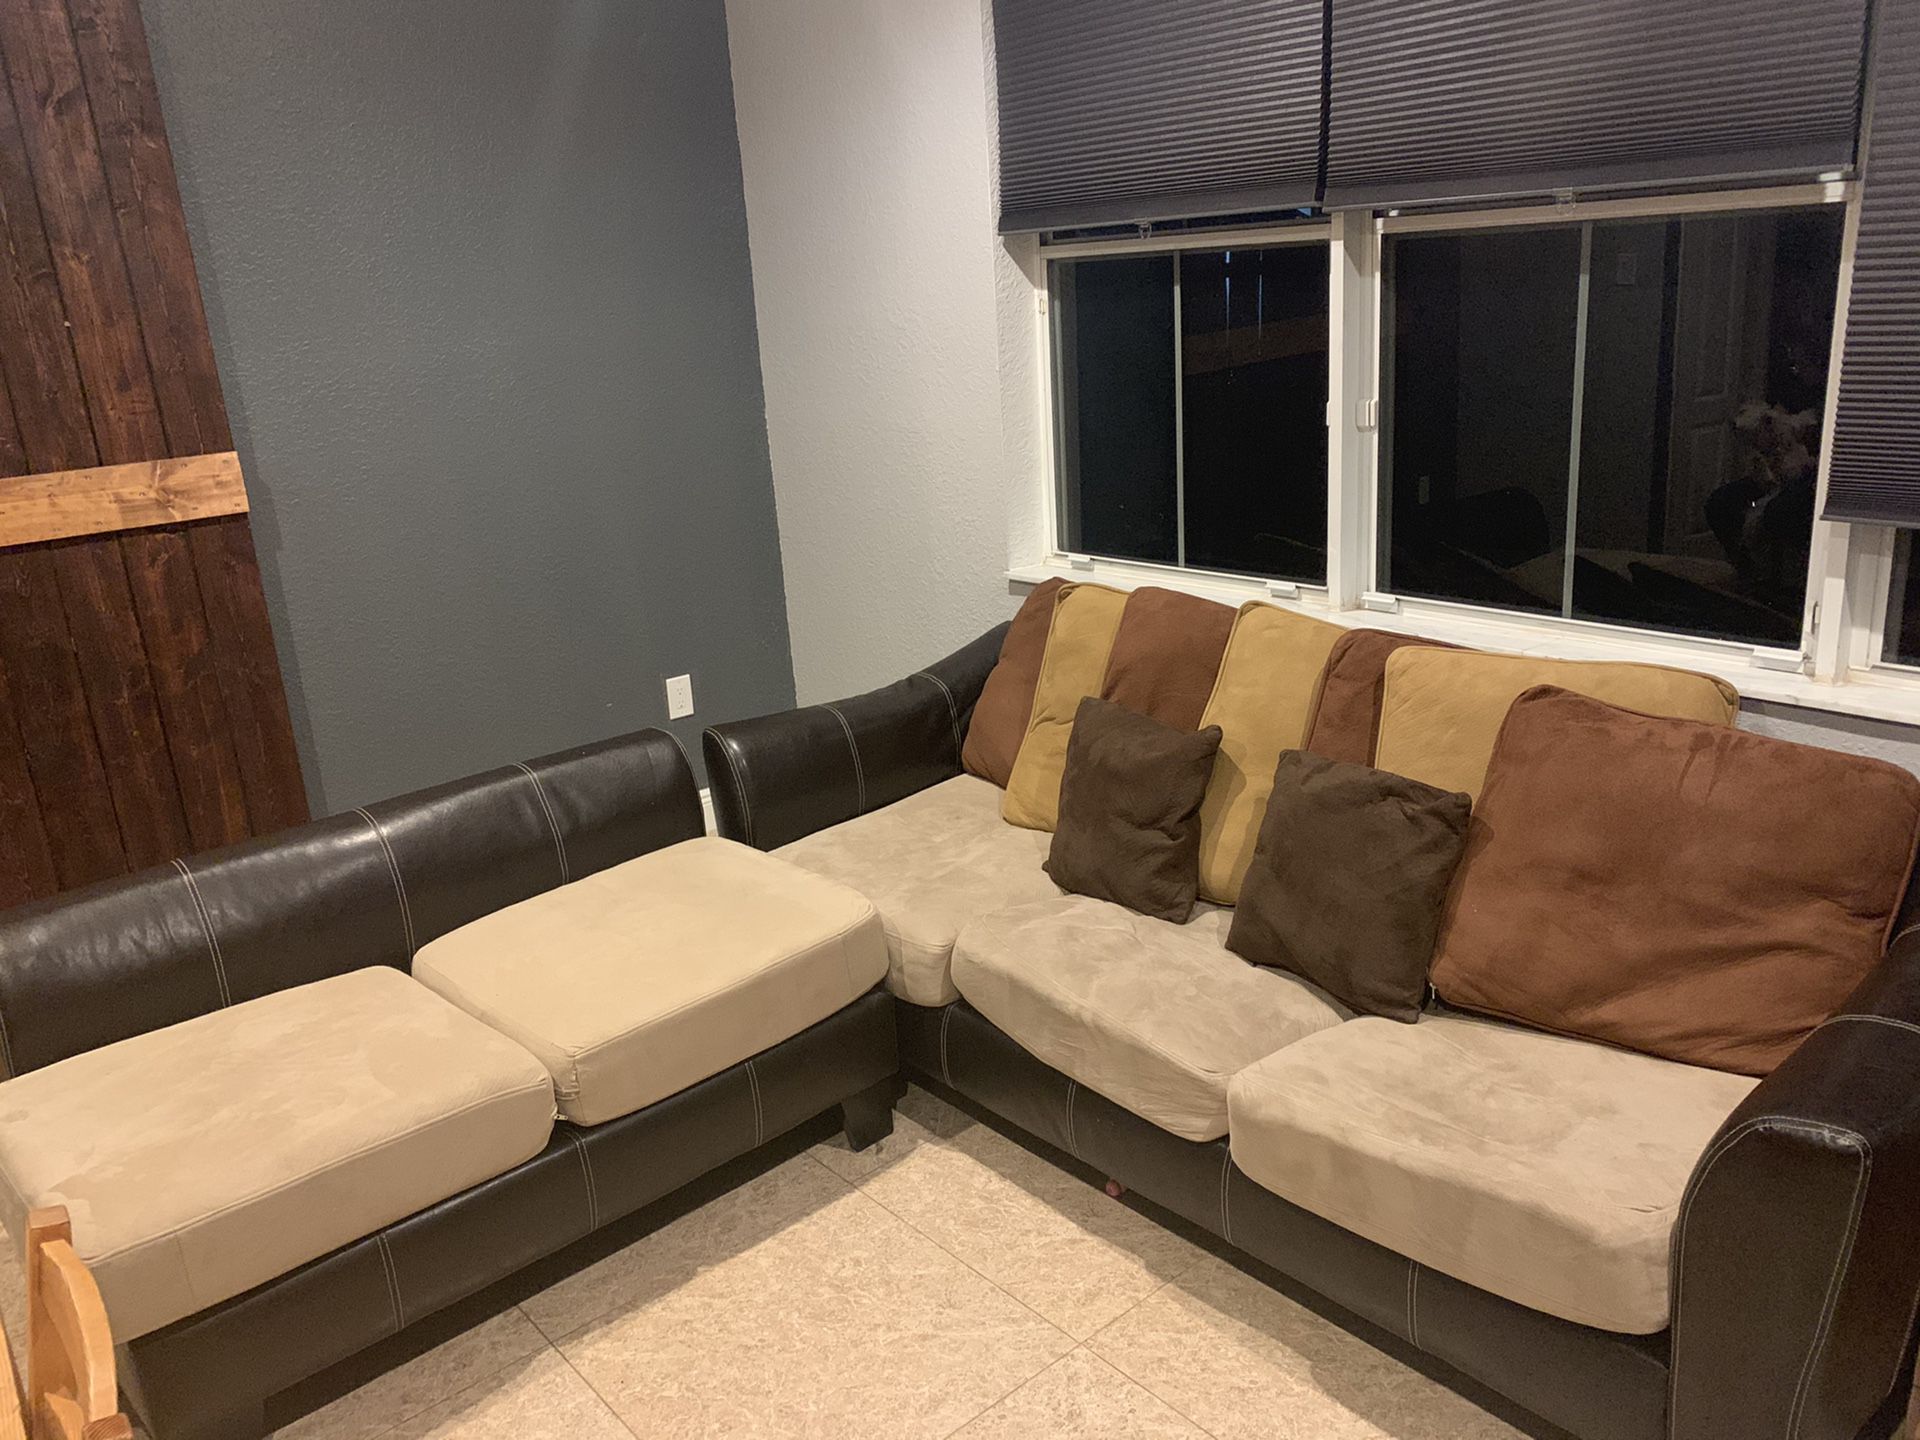 Sectional Give Away!!! FREE